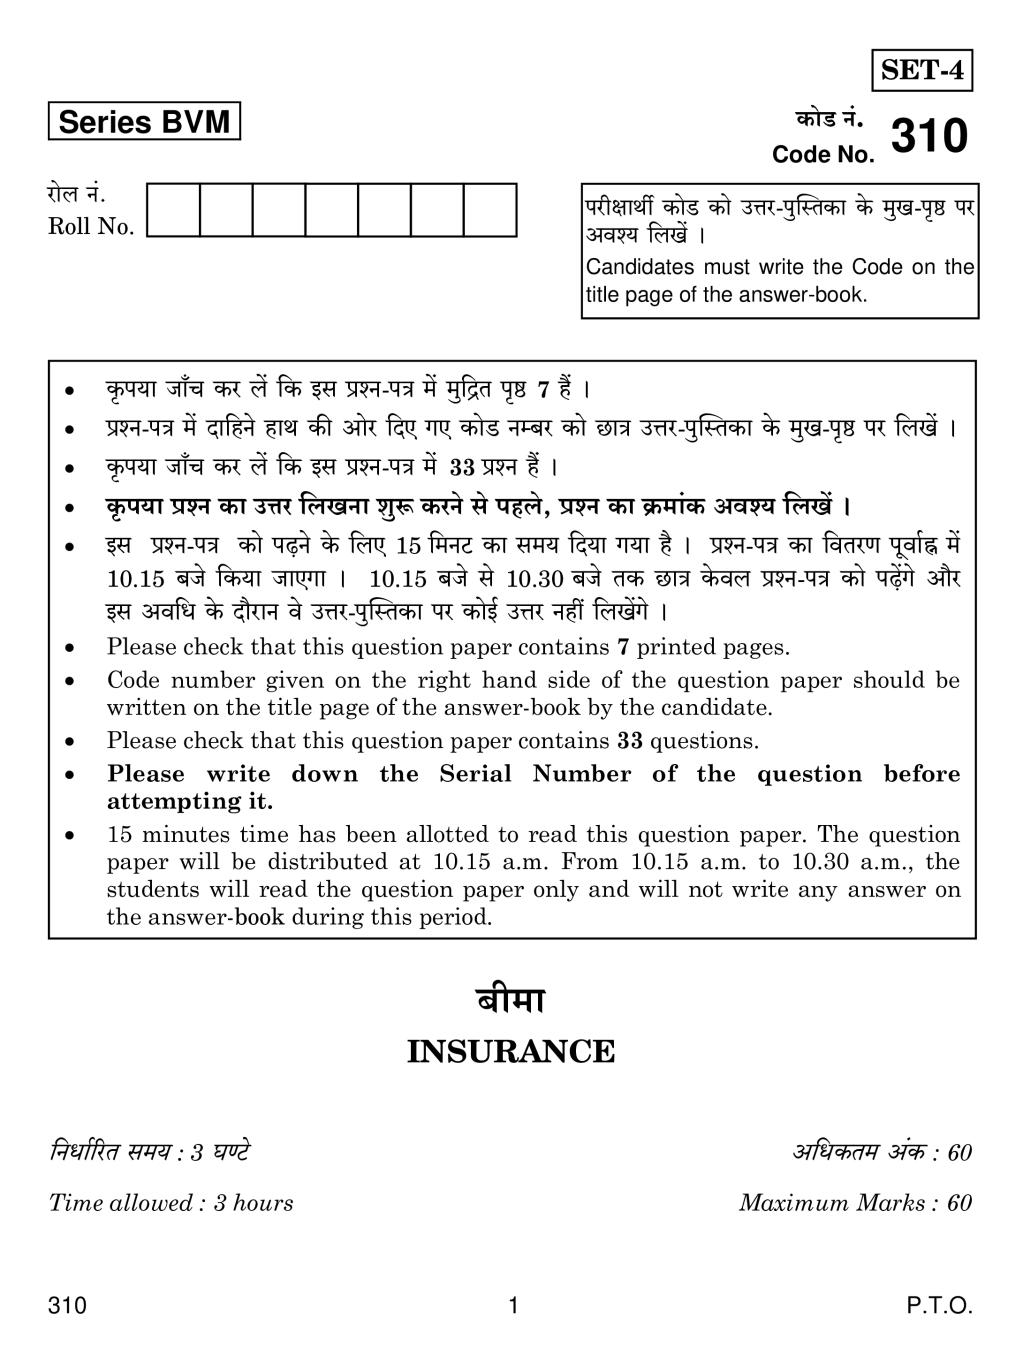 CBSE Class 12 Insurance Question Paper 2019 - Page 1